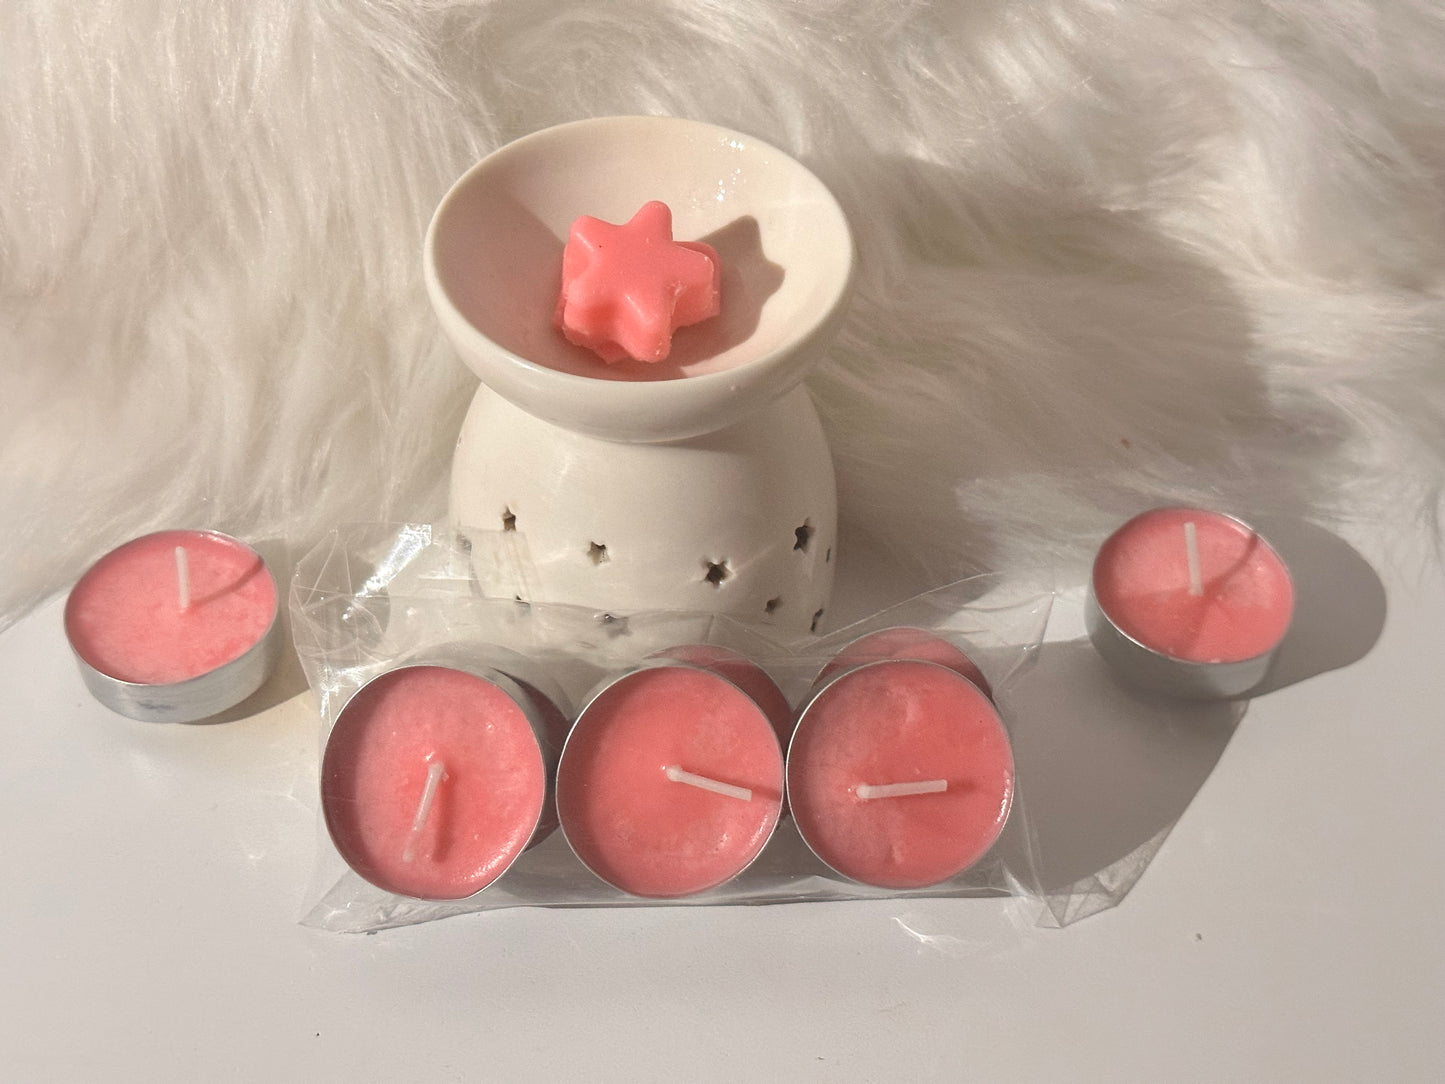 Champagne and Rose Scented Tea Lights: Illuminate Your Moments with Elegance and Romance